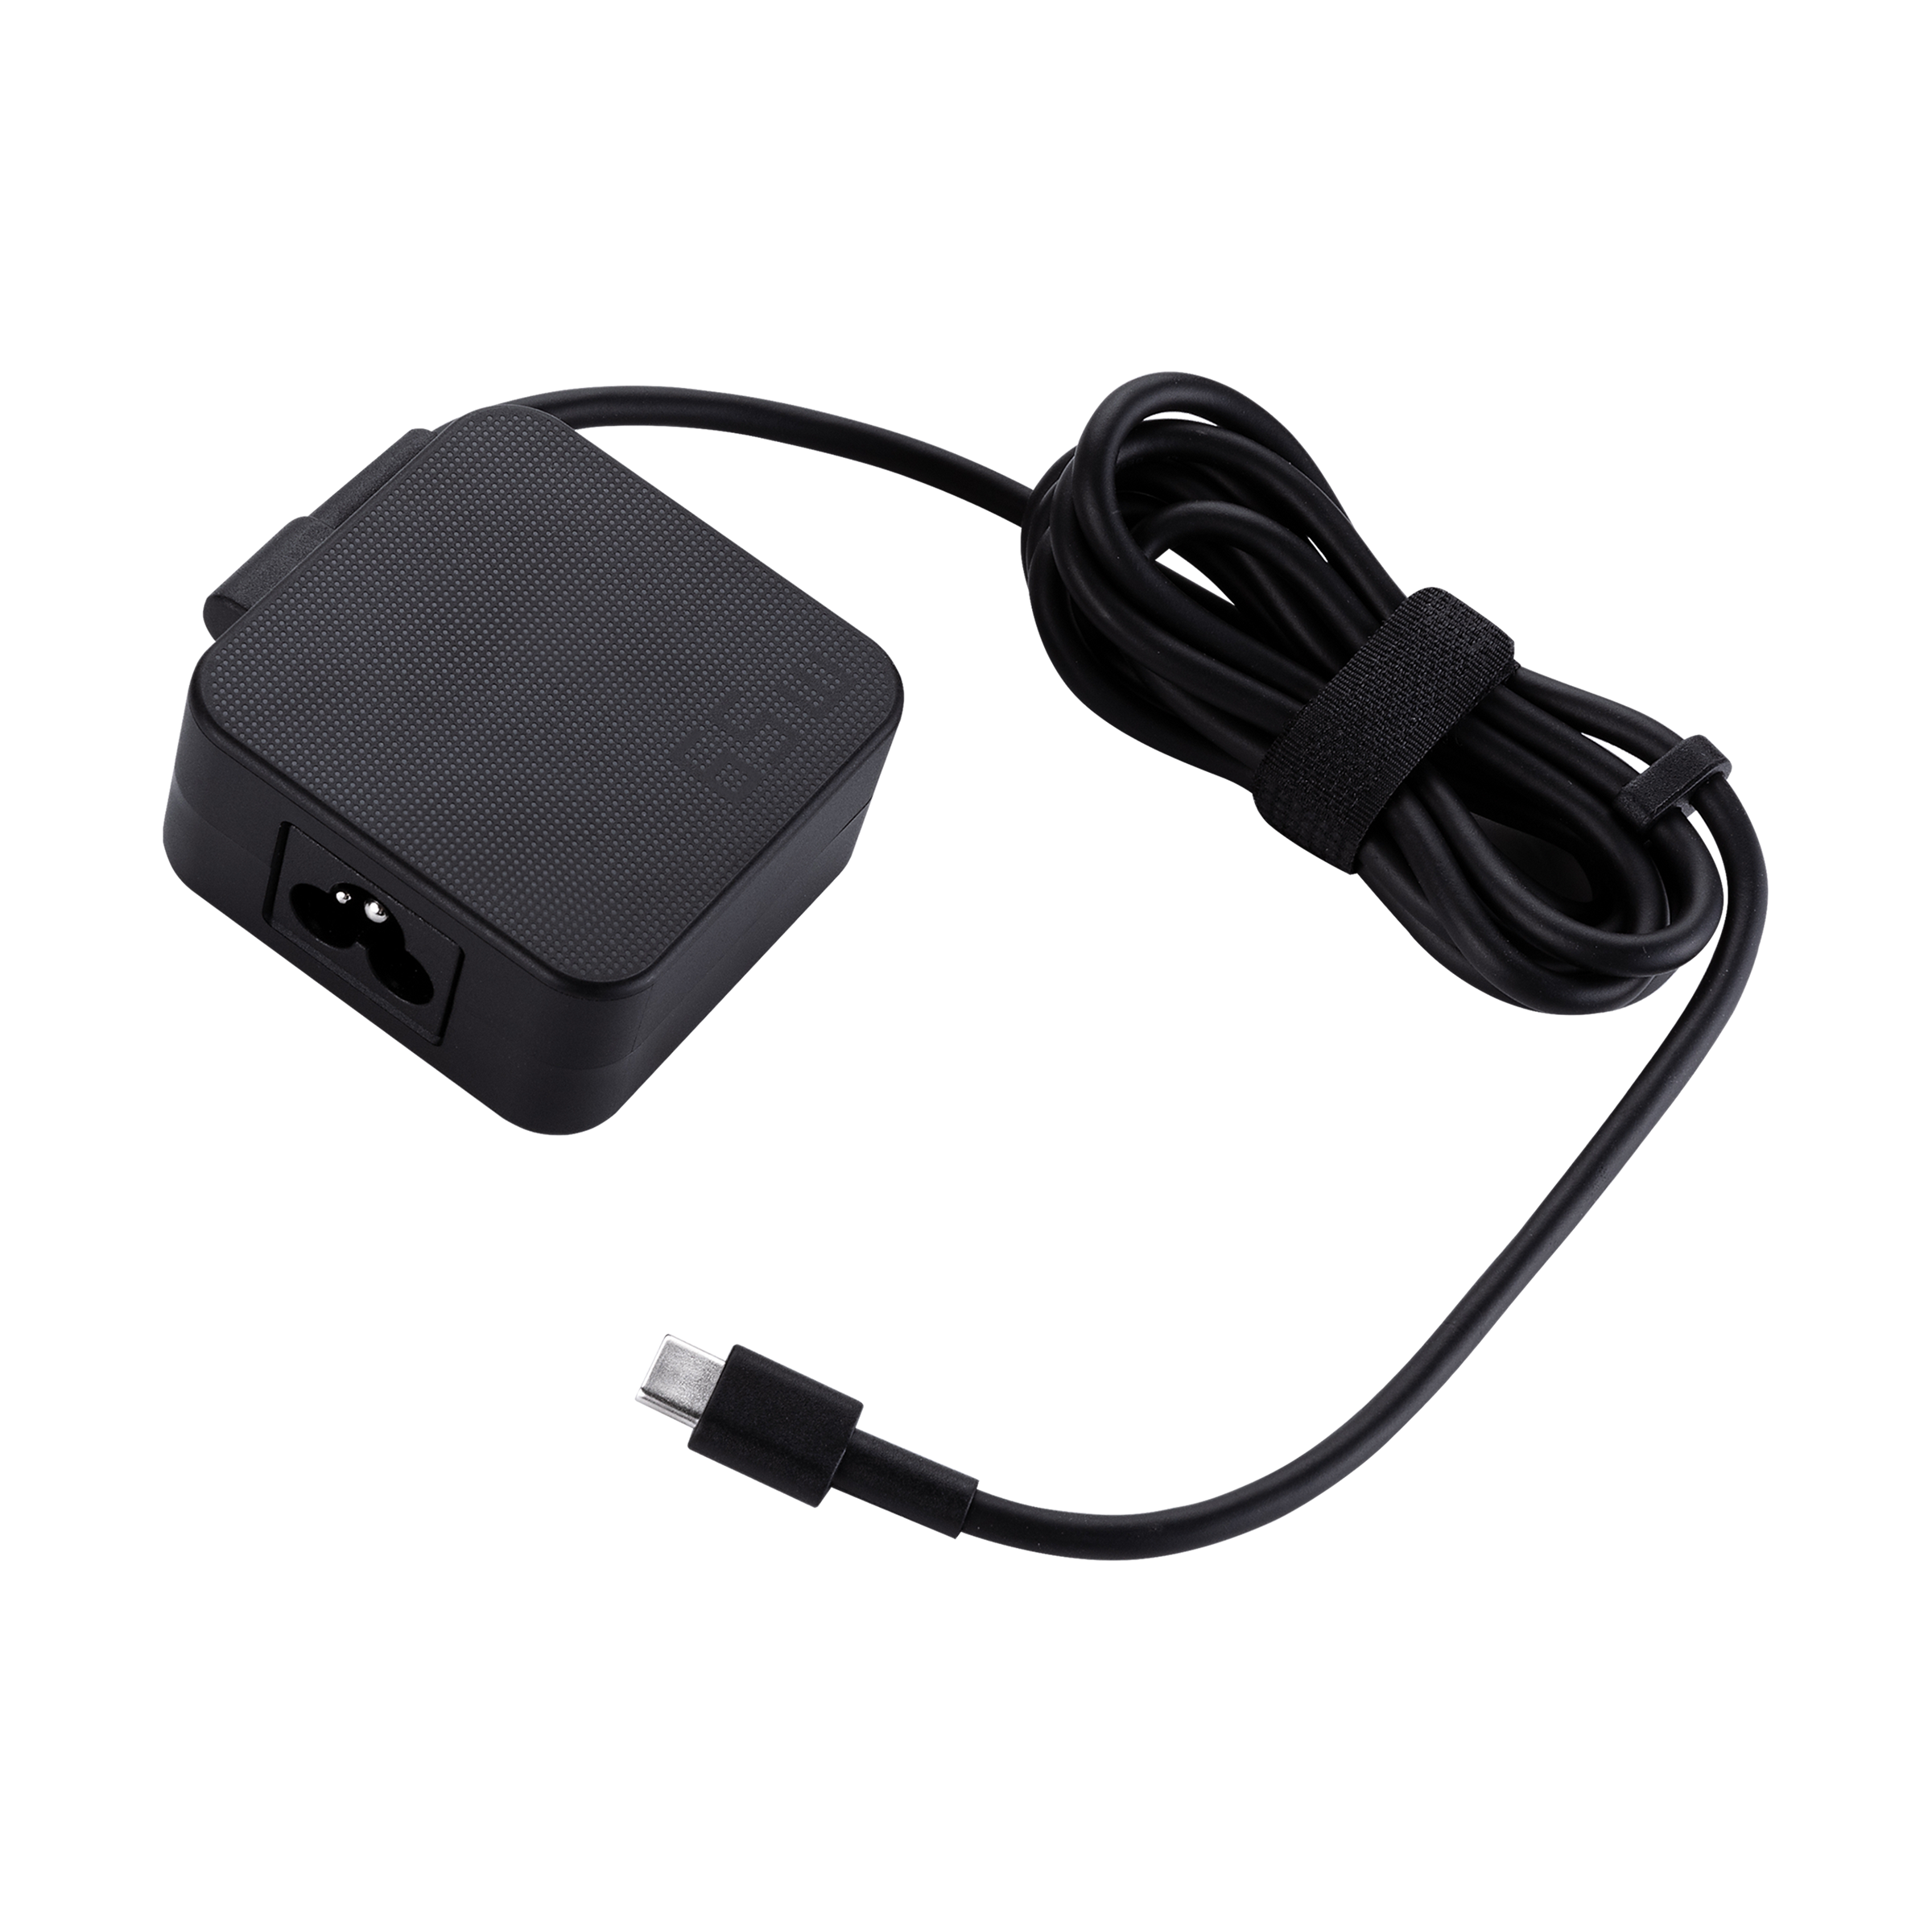 Asus 65W 65W USB-C Power Adapter, Type C Laptop Charger